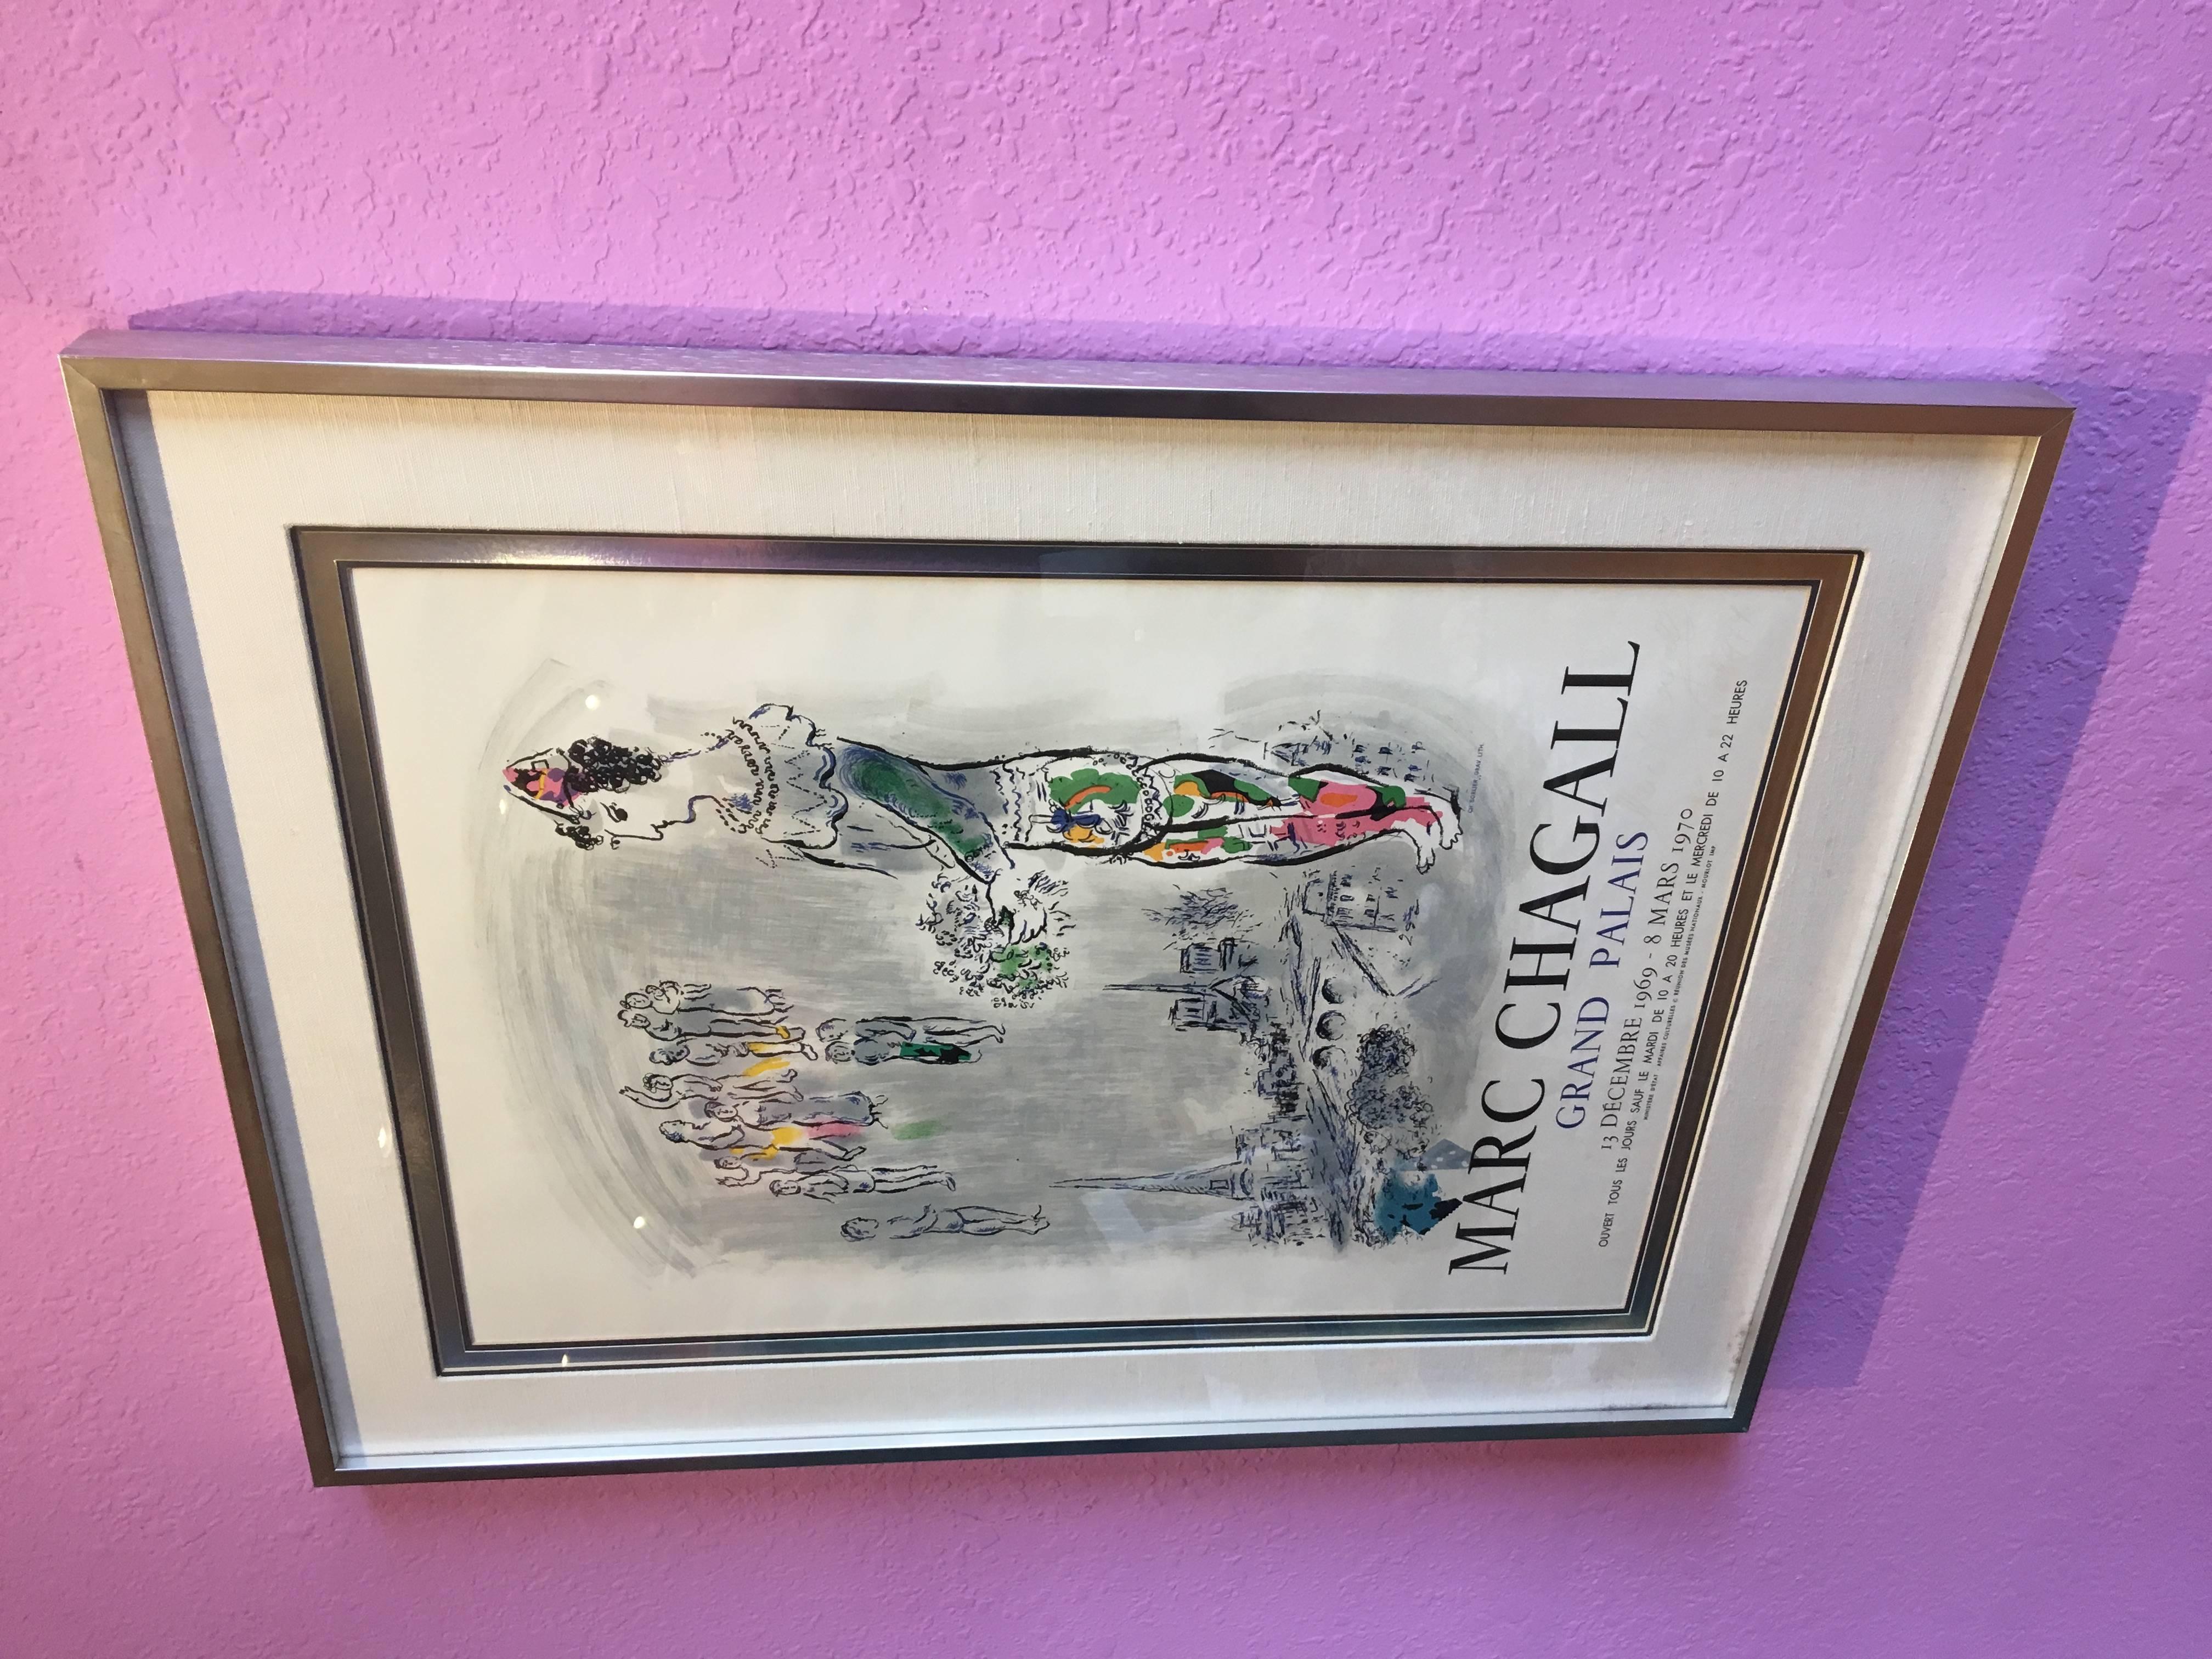 Beautiful rare exhibition poster framed, signed by the artist, circa 1969 by Sorlier Lithograph, the poster its in nice condition the signature its a bit faded.